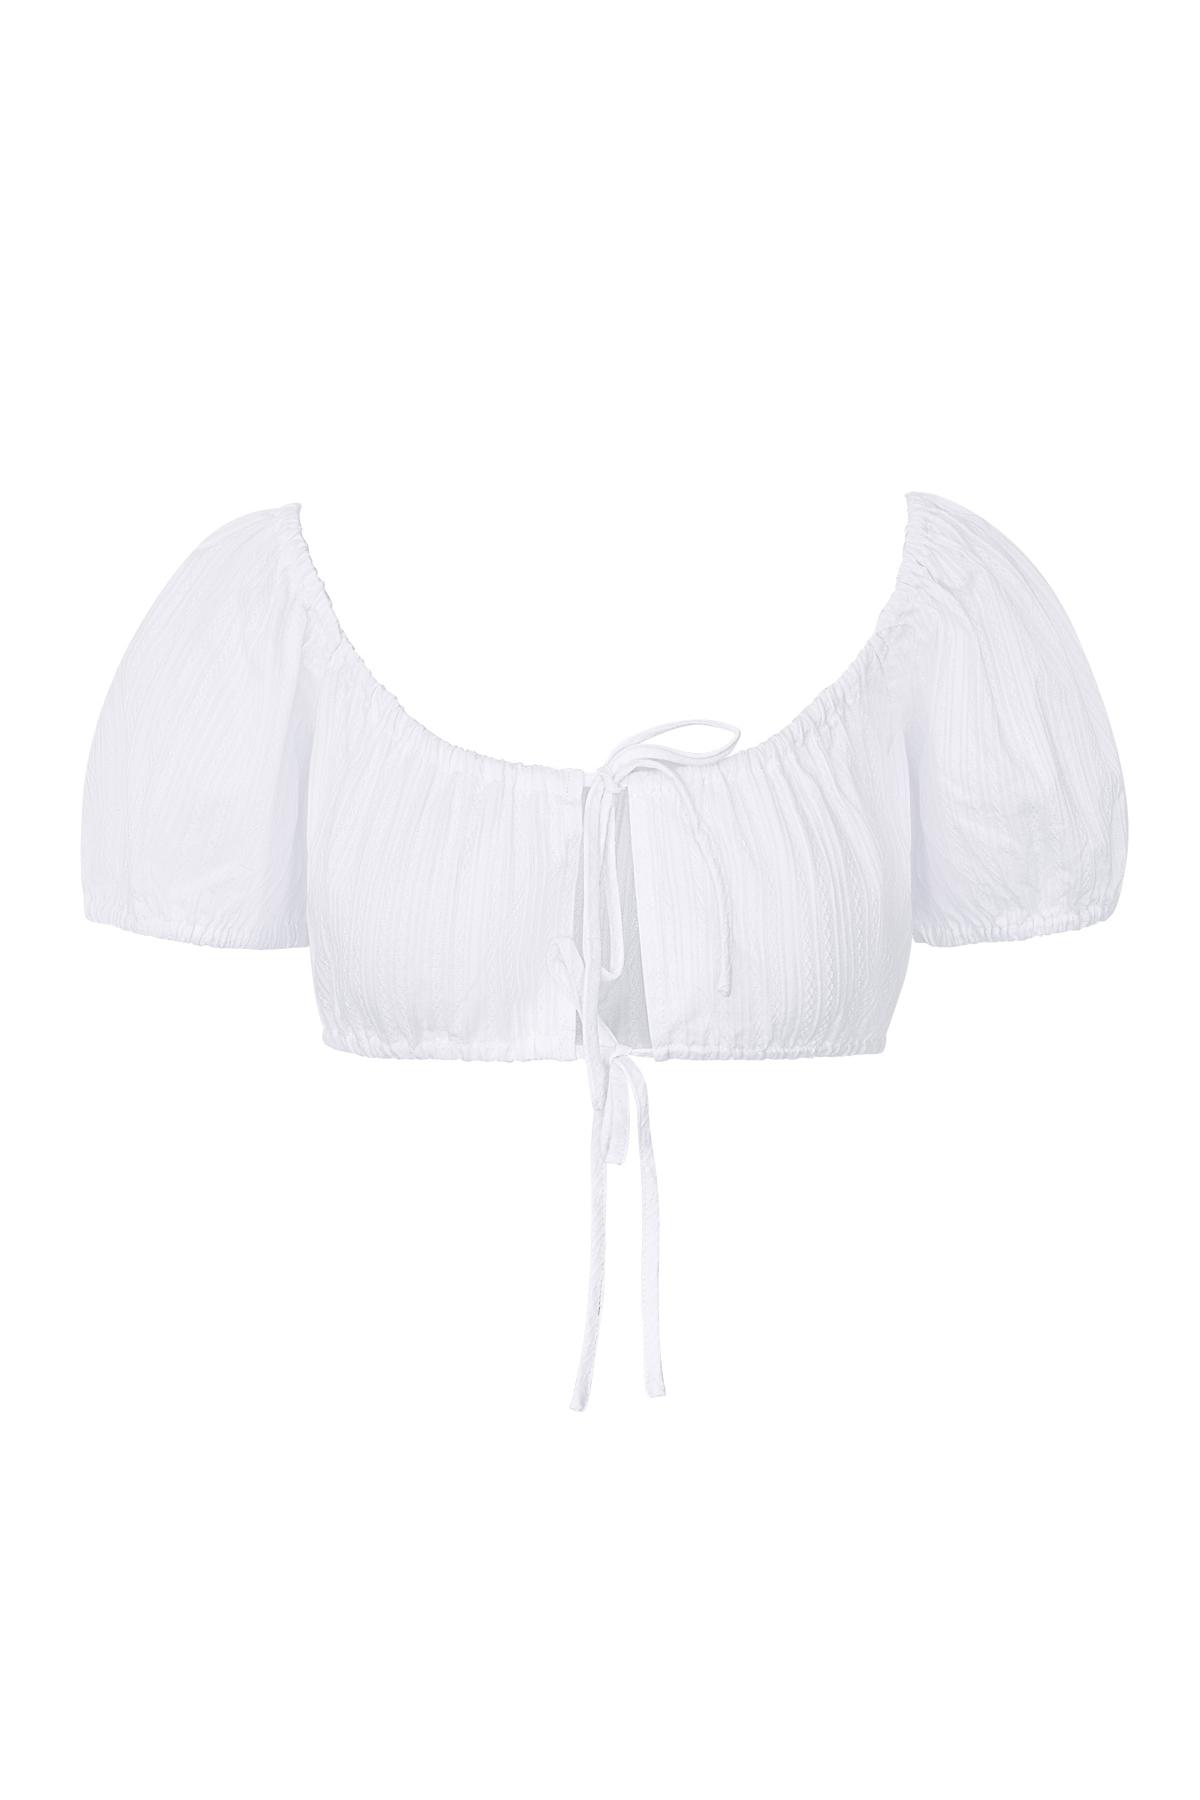 Crop top knotted White L h5 